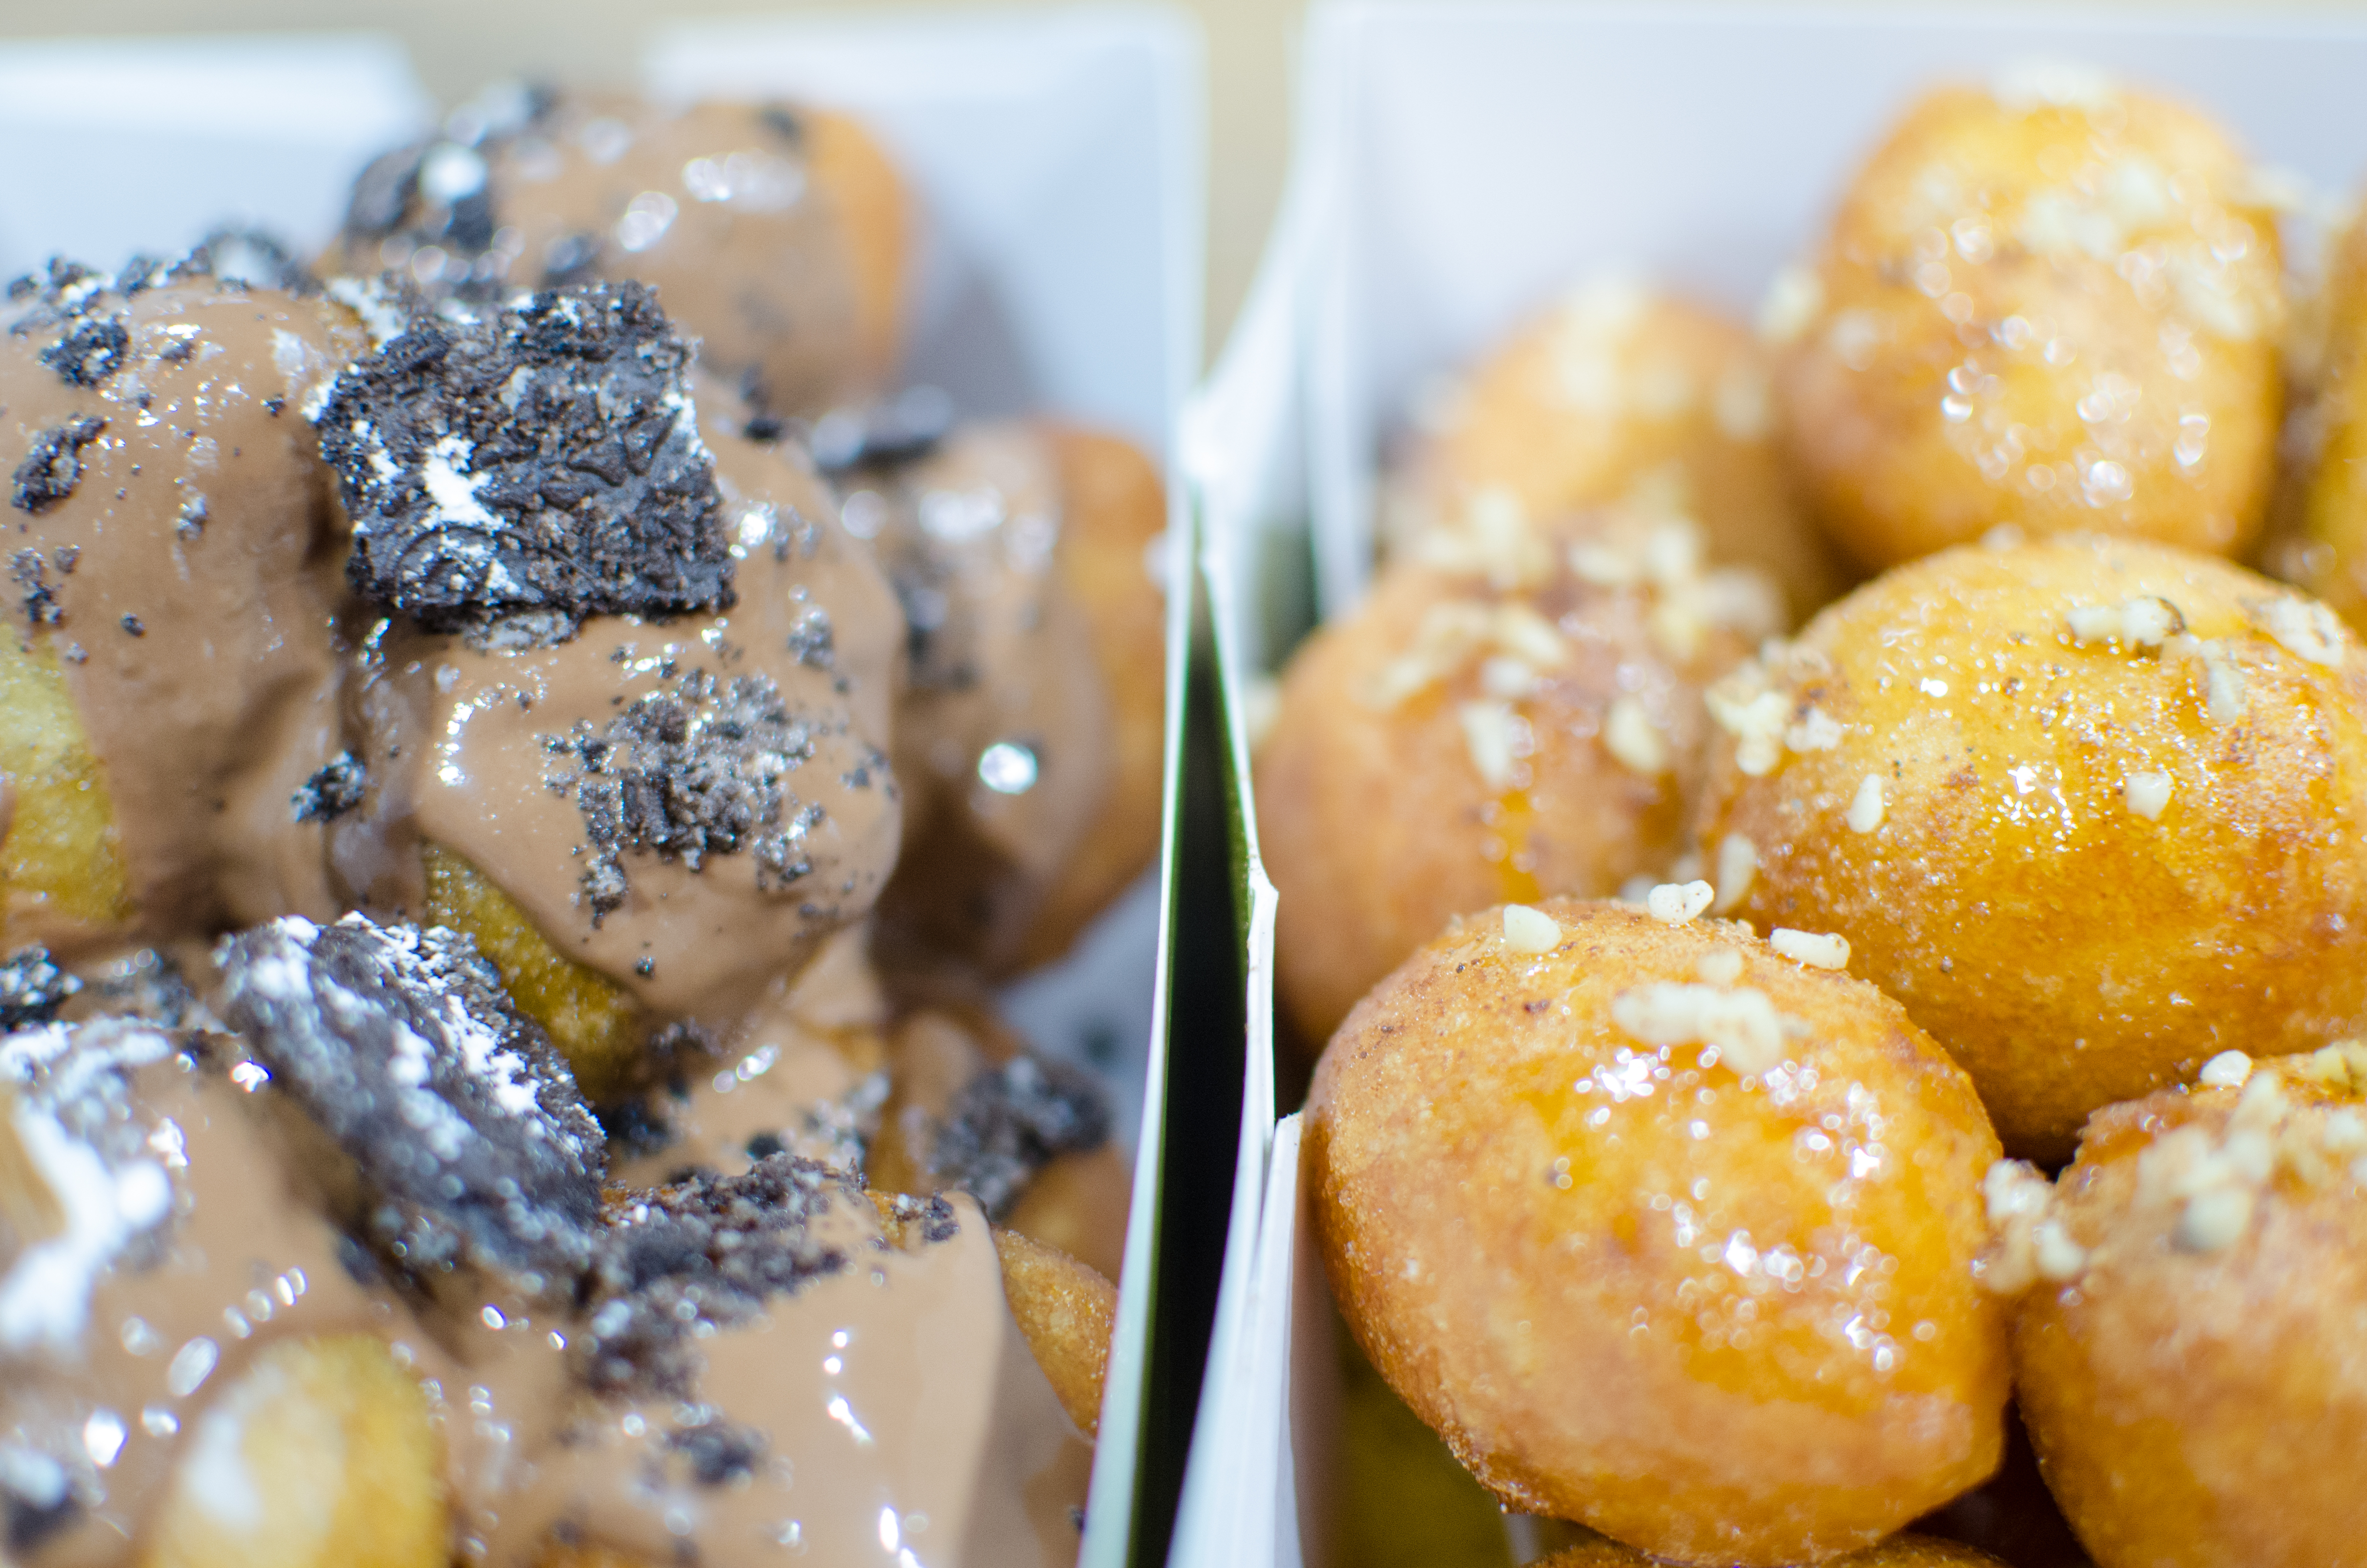 Closeup shot of two side-by-side paper containers of fried dough balls. One is topped in a chocolate glaze with crushed Oreos.